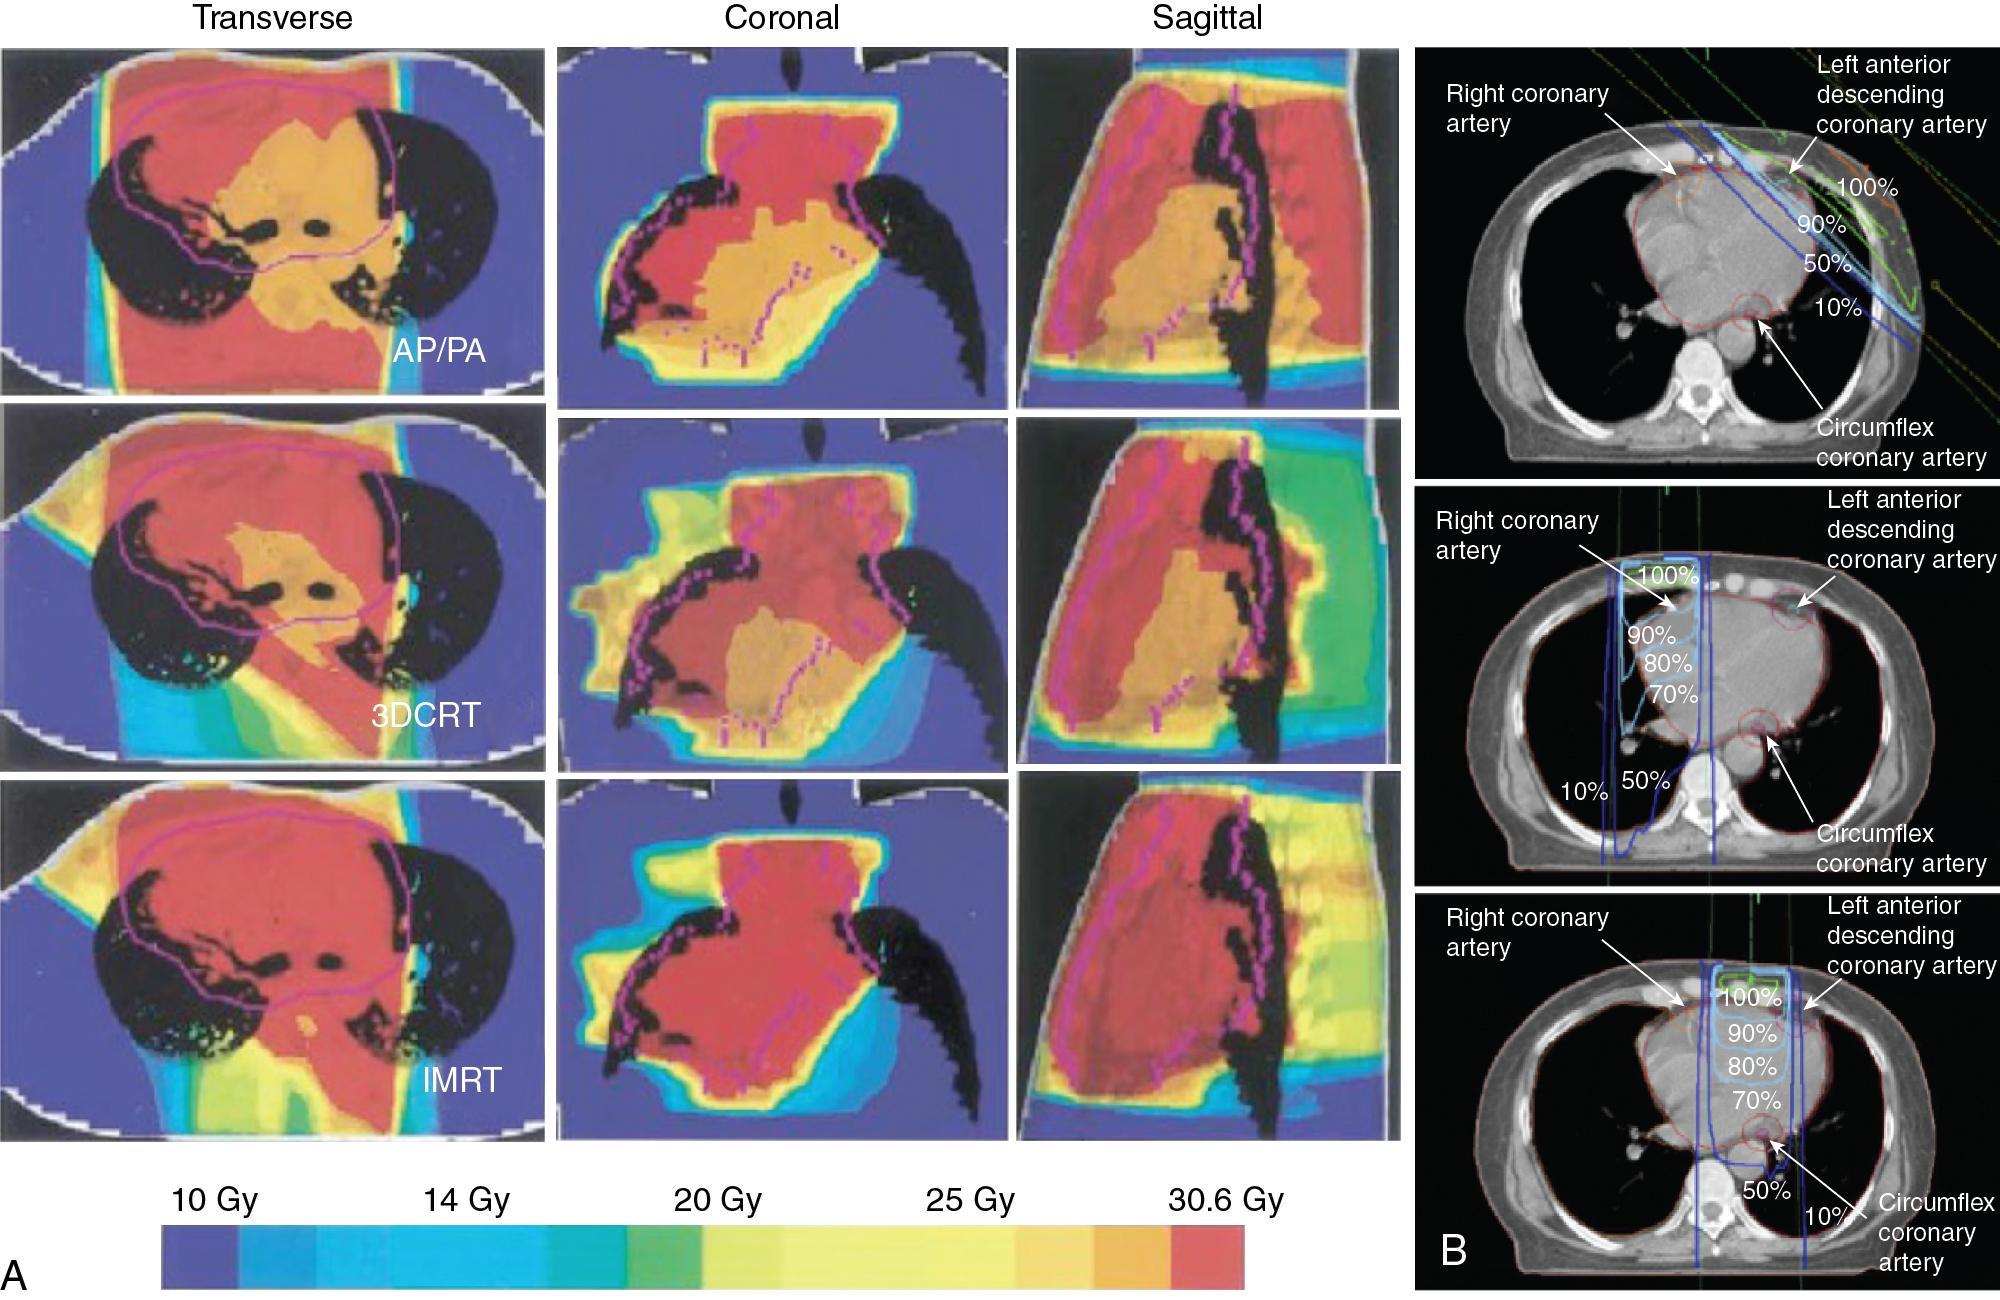 FIG. 4.1, A, Comparison of dose distribution of conventional parallel opposed ( AP/PA ) versus three-dimensional conformal radiation therapy (3- DCRT ) versus intensity-modulated radiation therapy ( IMRT ) plans. (a) Example 1: large volume. (b) Example 2: repeat radiation therapy (RT). B. Axial computed tomography sections showing dose distributions from right and left 6-MV direct anterior internal mammary fields and left 60 Co pair radiotherapy. Isodose lines correspond to percentages of given dose. Three main coronary arteries are outlined, with 1-cm margin added to each.